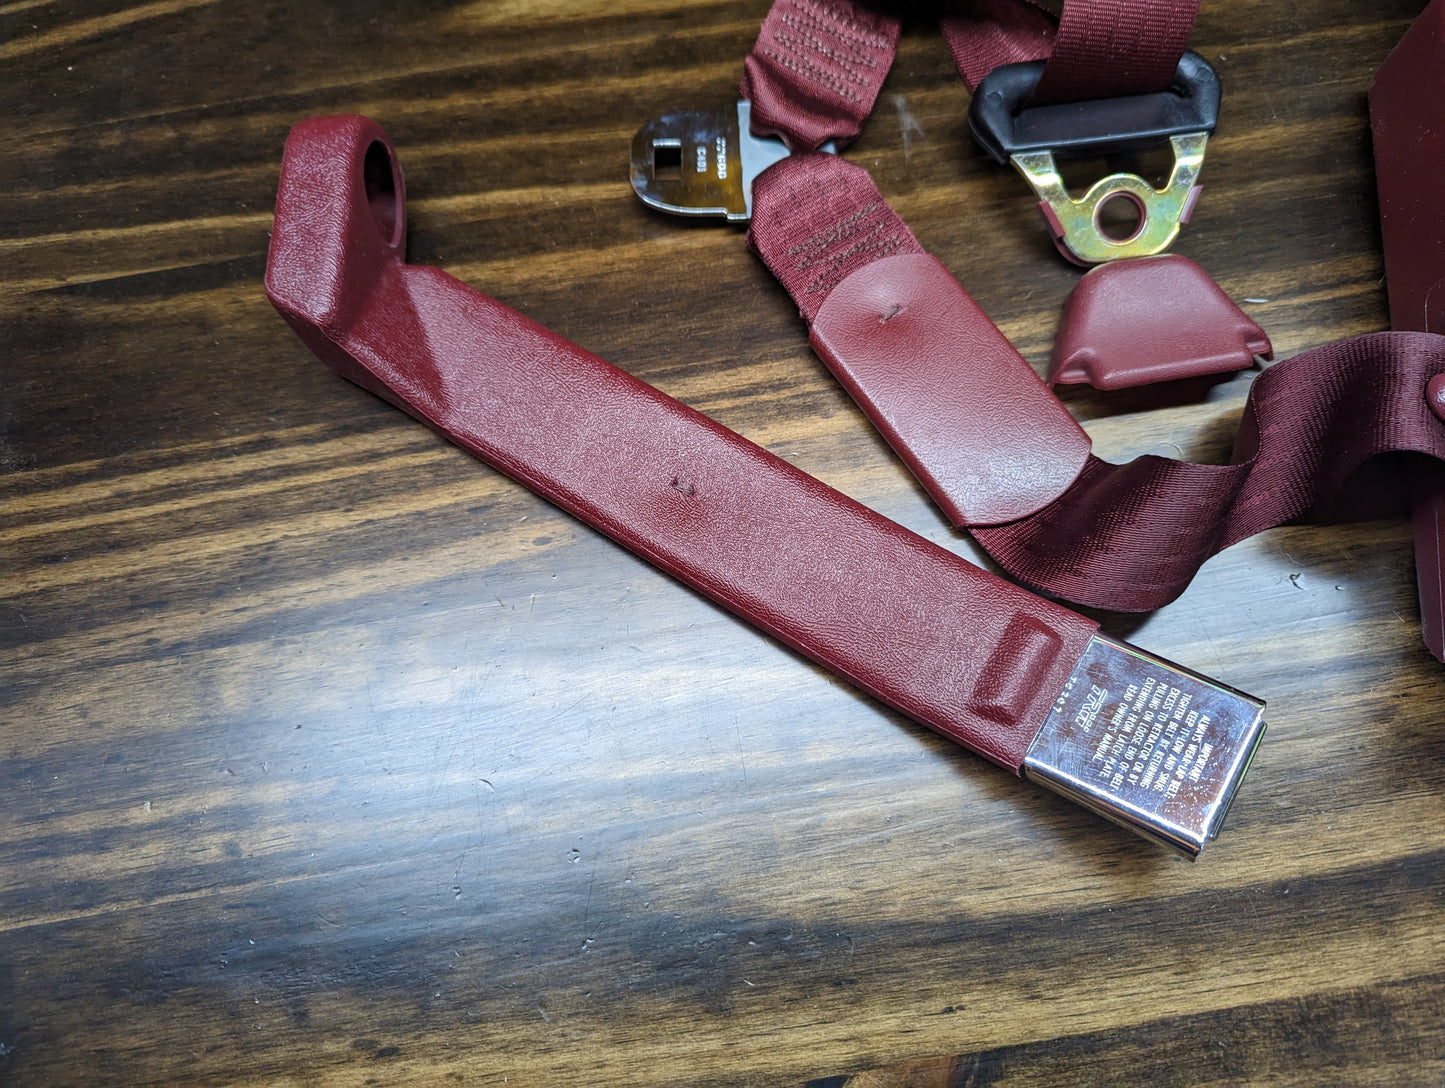 NOS Passenger Seat Belt Retractor & Buckle in Red for 1982 - 1993 Chevy S10, GMC S15